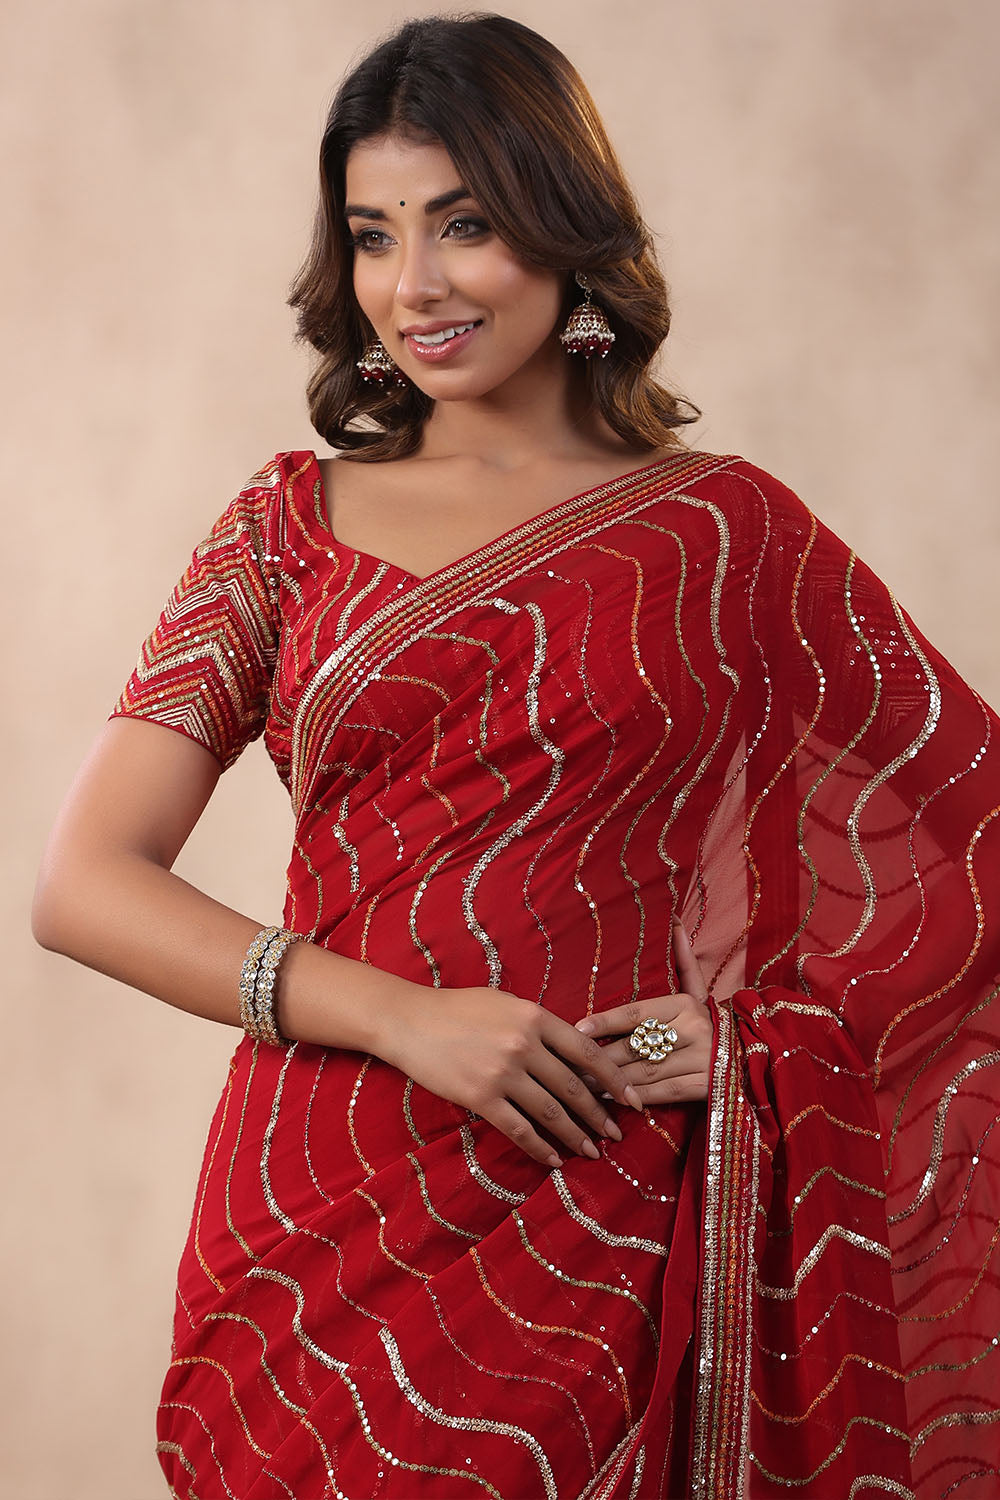 Maroon Color Embroidered Georgette Saree